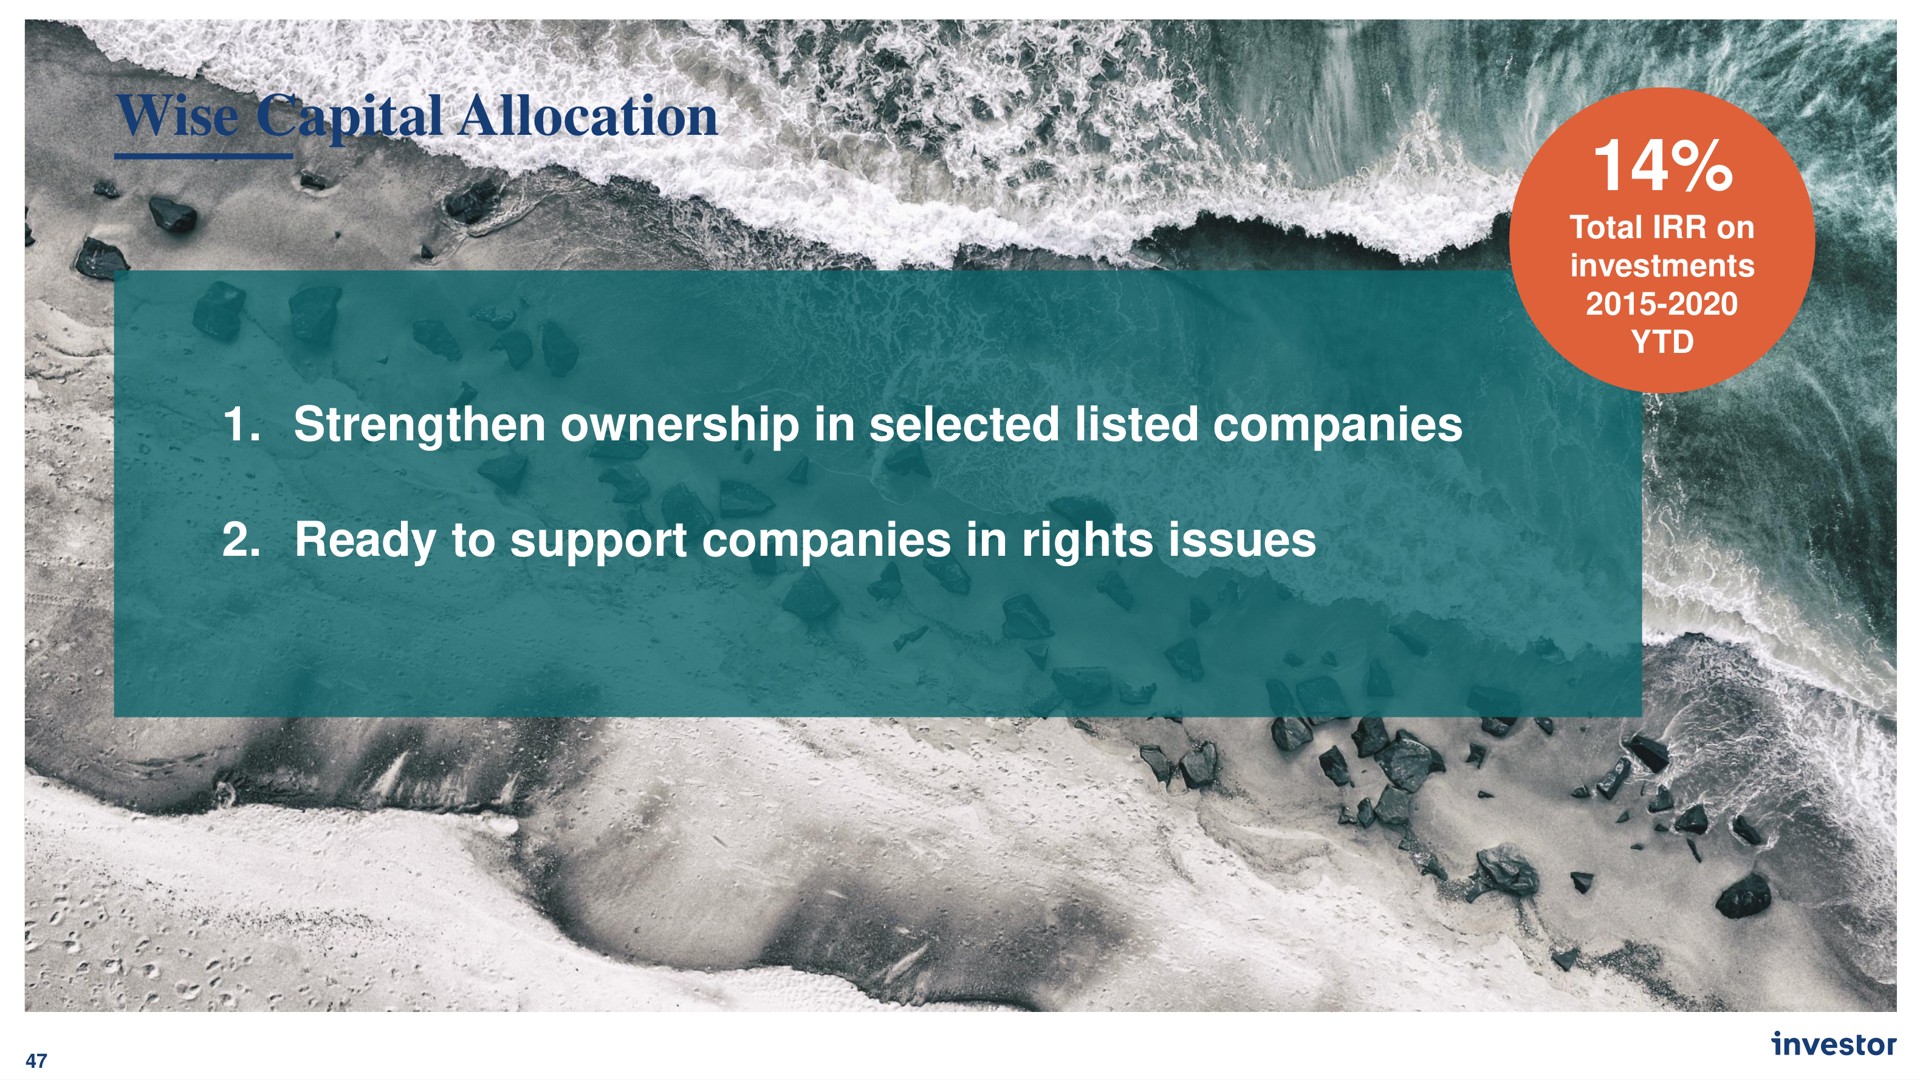 wise capital allocation strengthen ownership in selected listed companies ready to support companies in rights issues | Investor AB